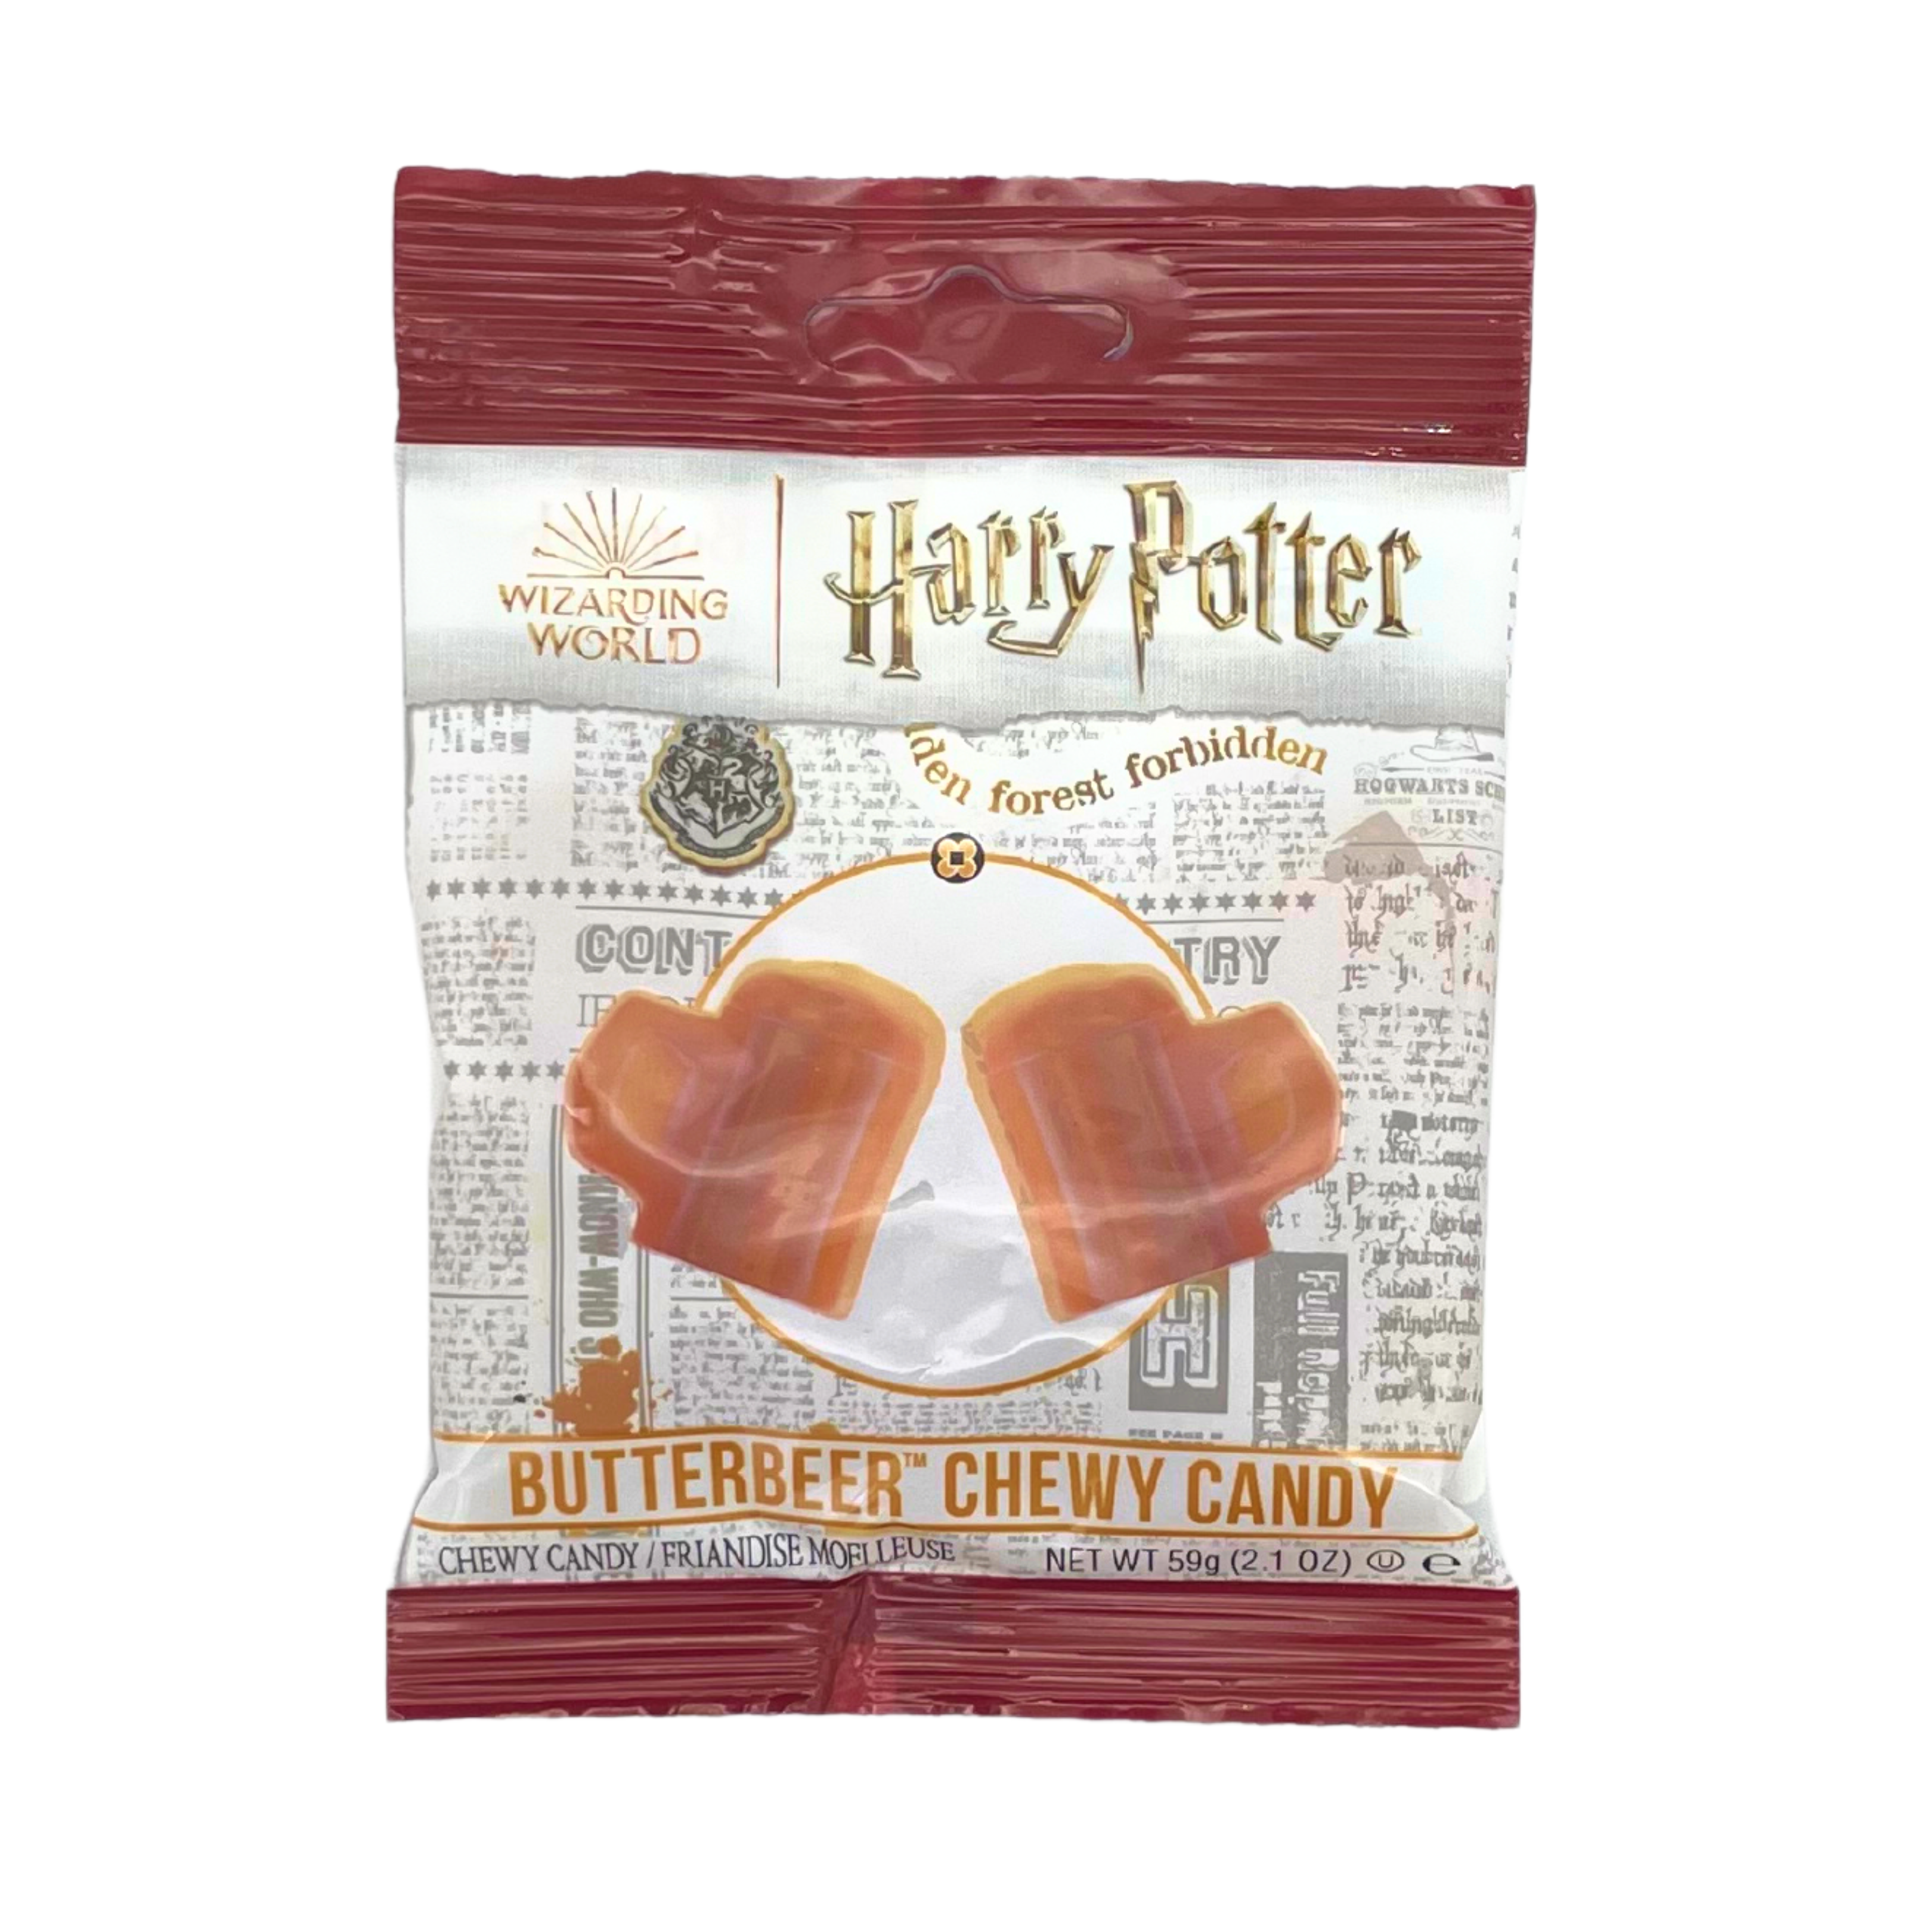 Jelly Belly - Harry Potter Butterbeer Chewy Candy - Caramelle al